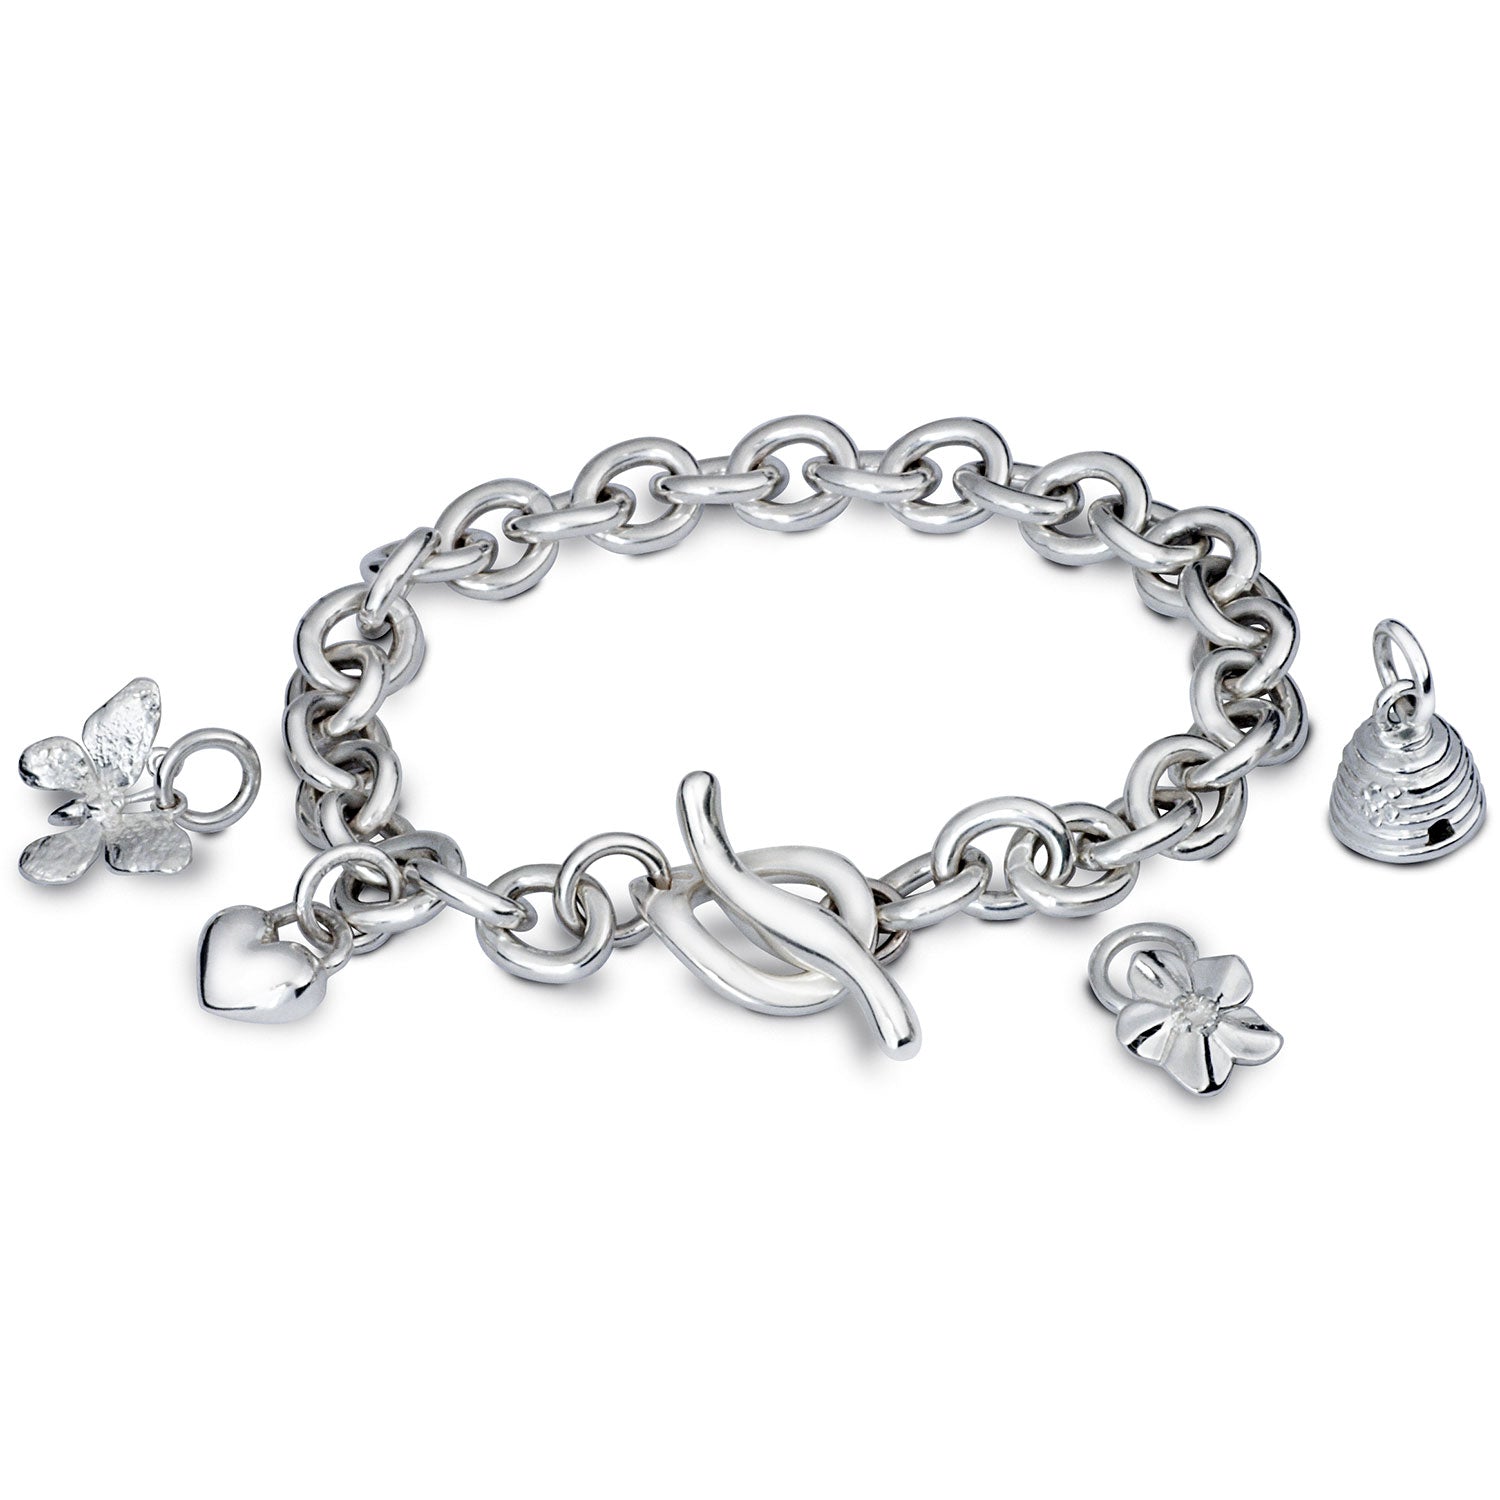 Stainless Steel Women's Bracelet with Charms - Silver